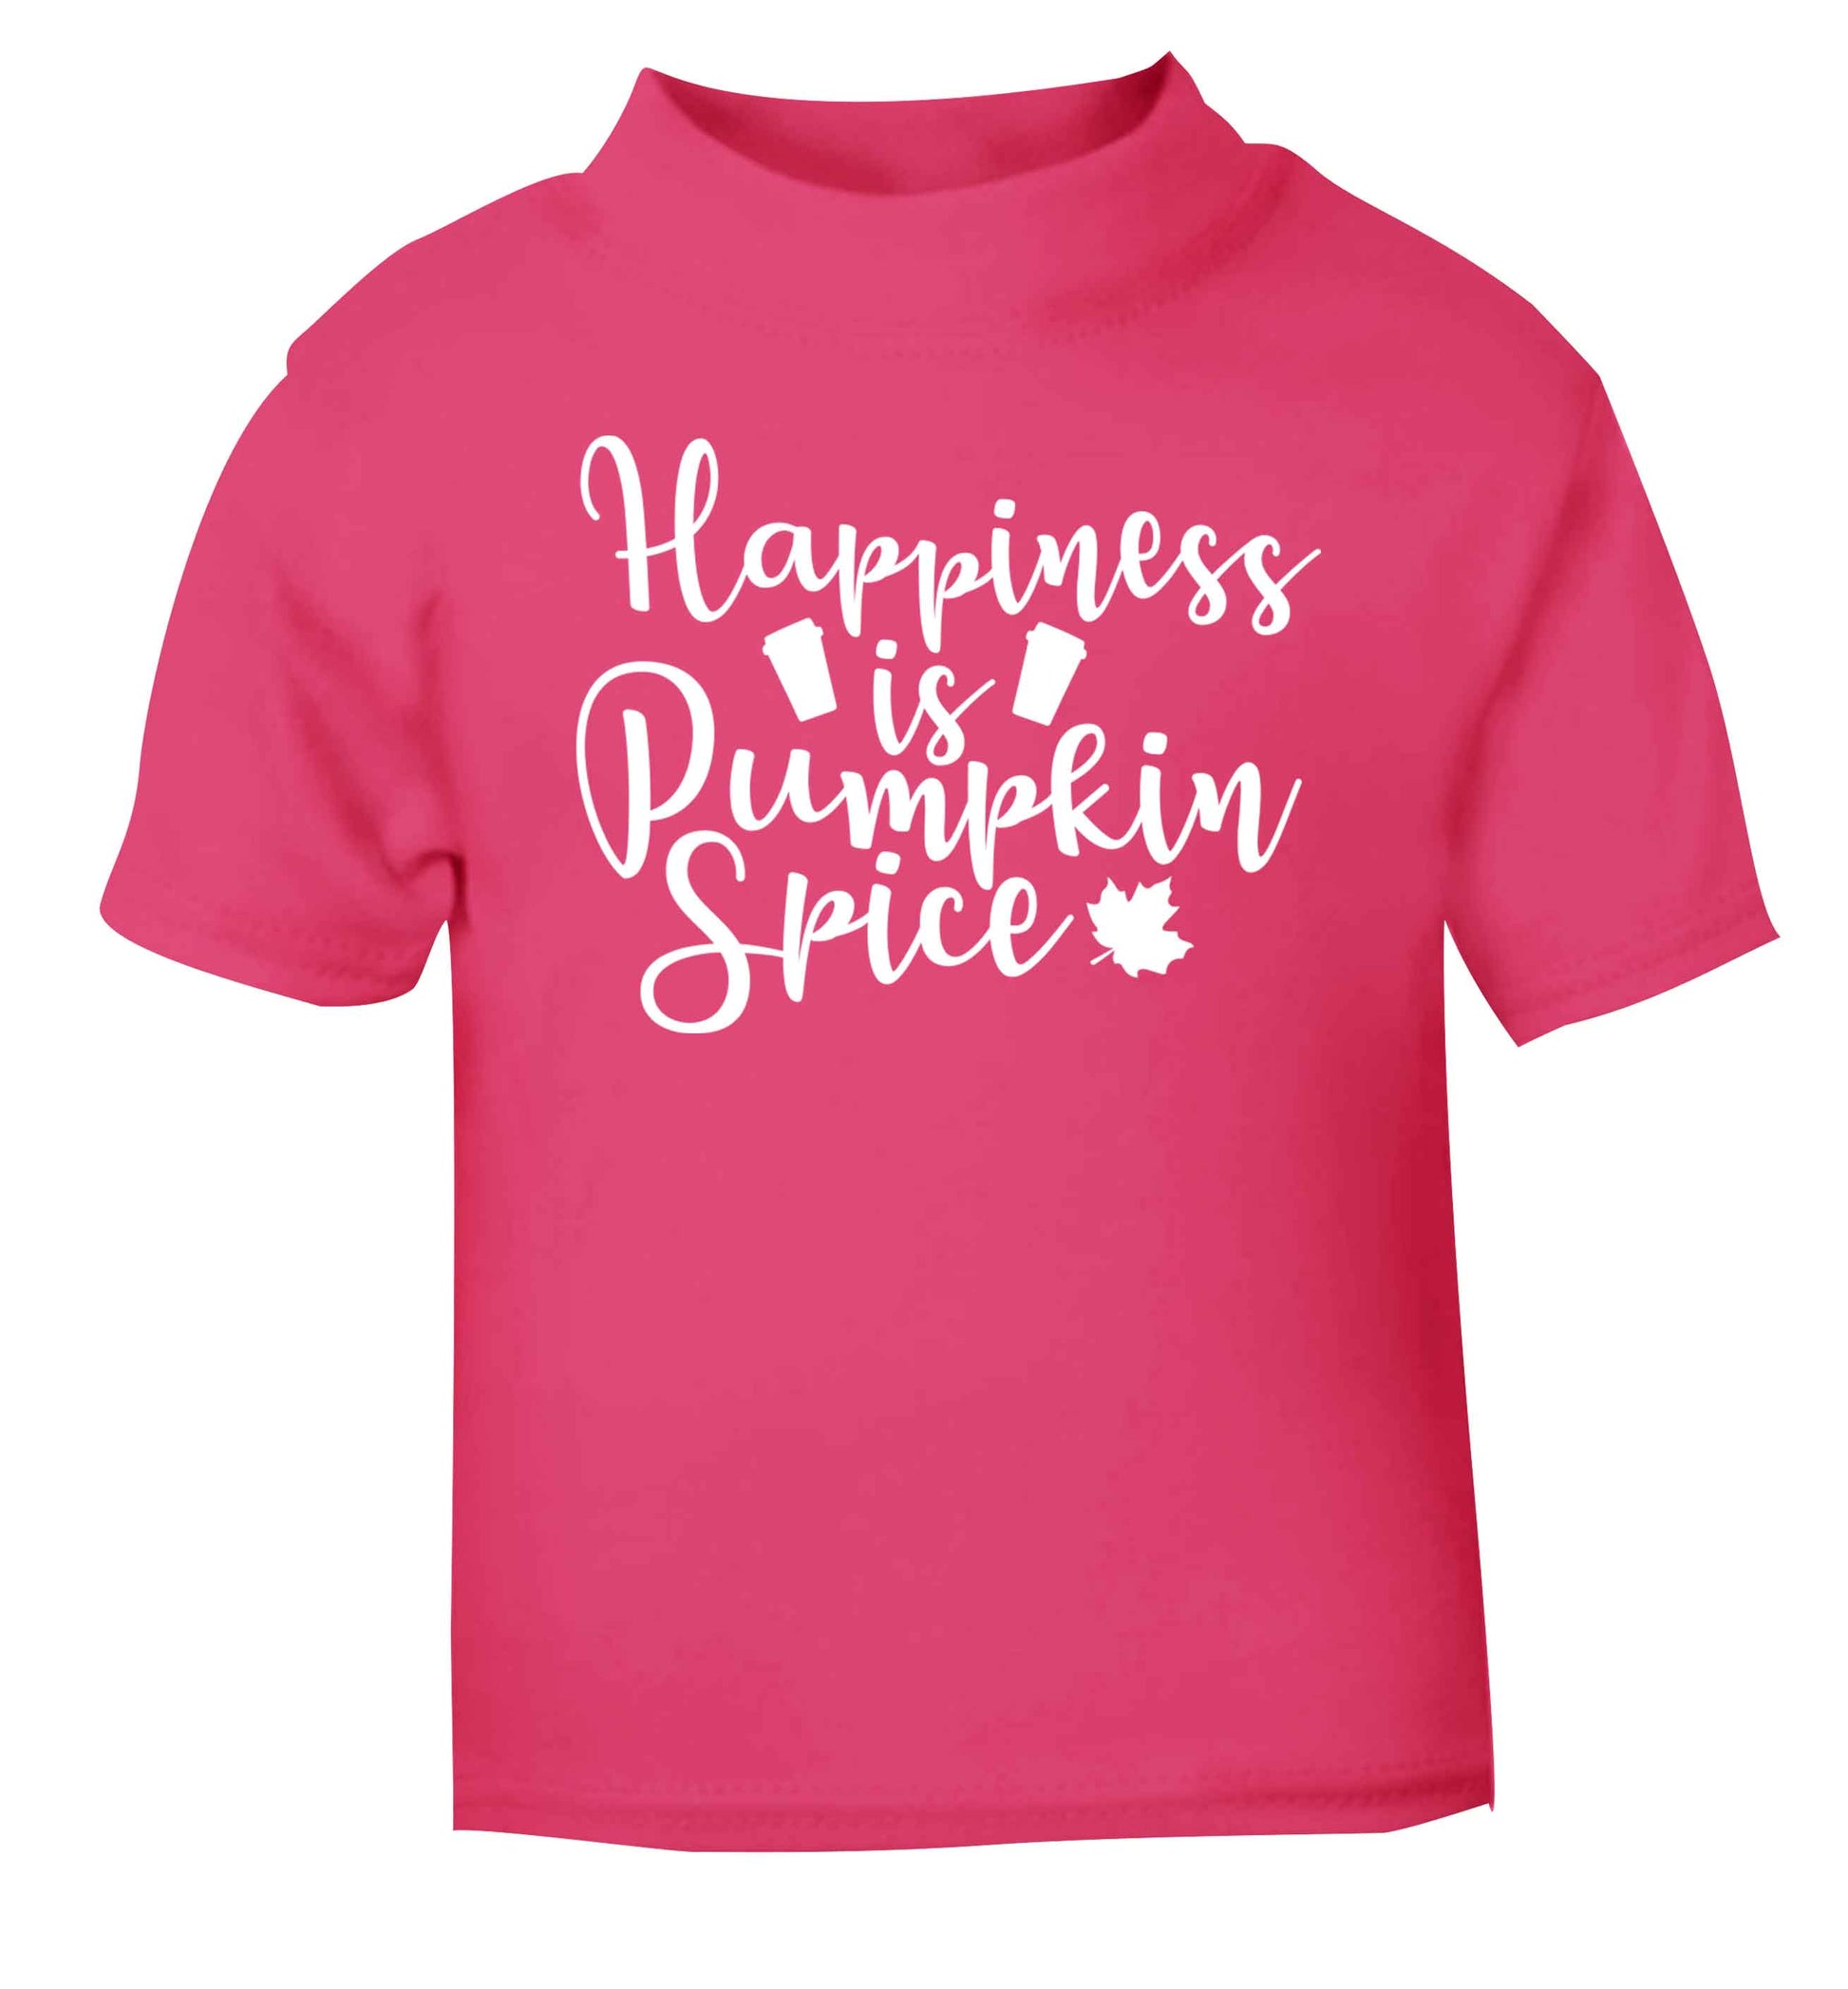 Happiness Pumpkin Spice pink baby toddler Tshirt 2 Years